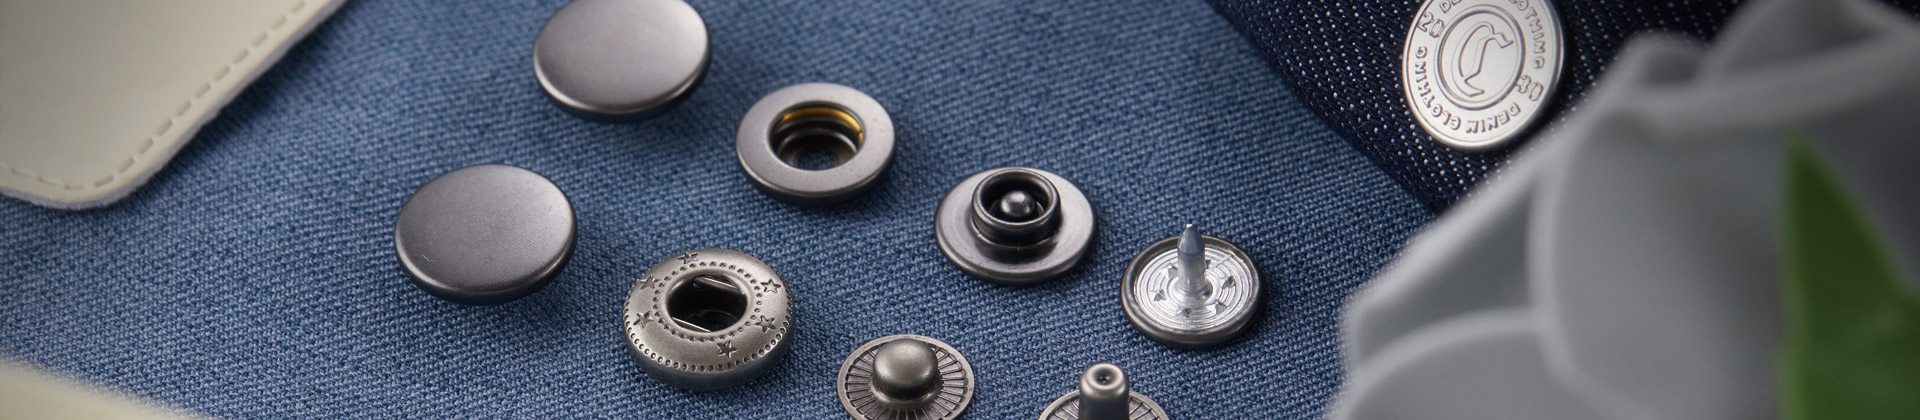 How to install jeans rivet buttons